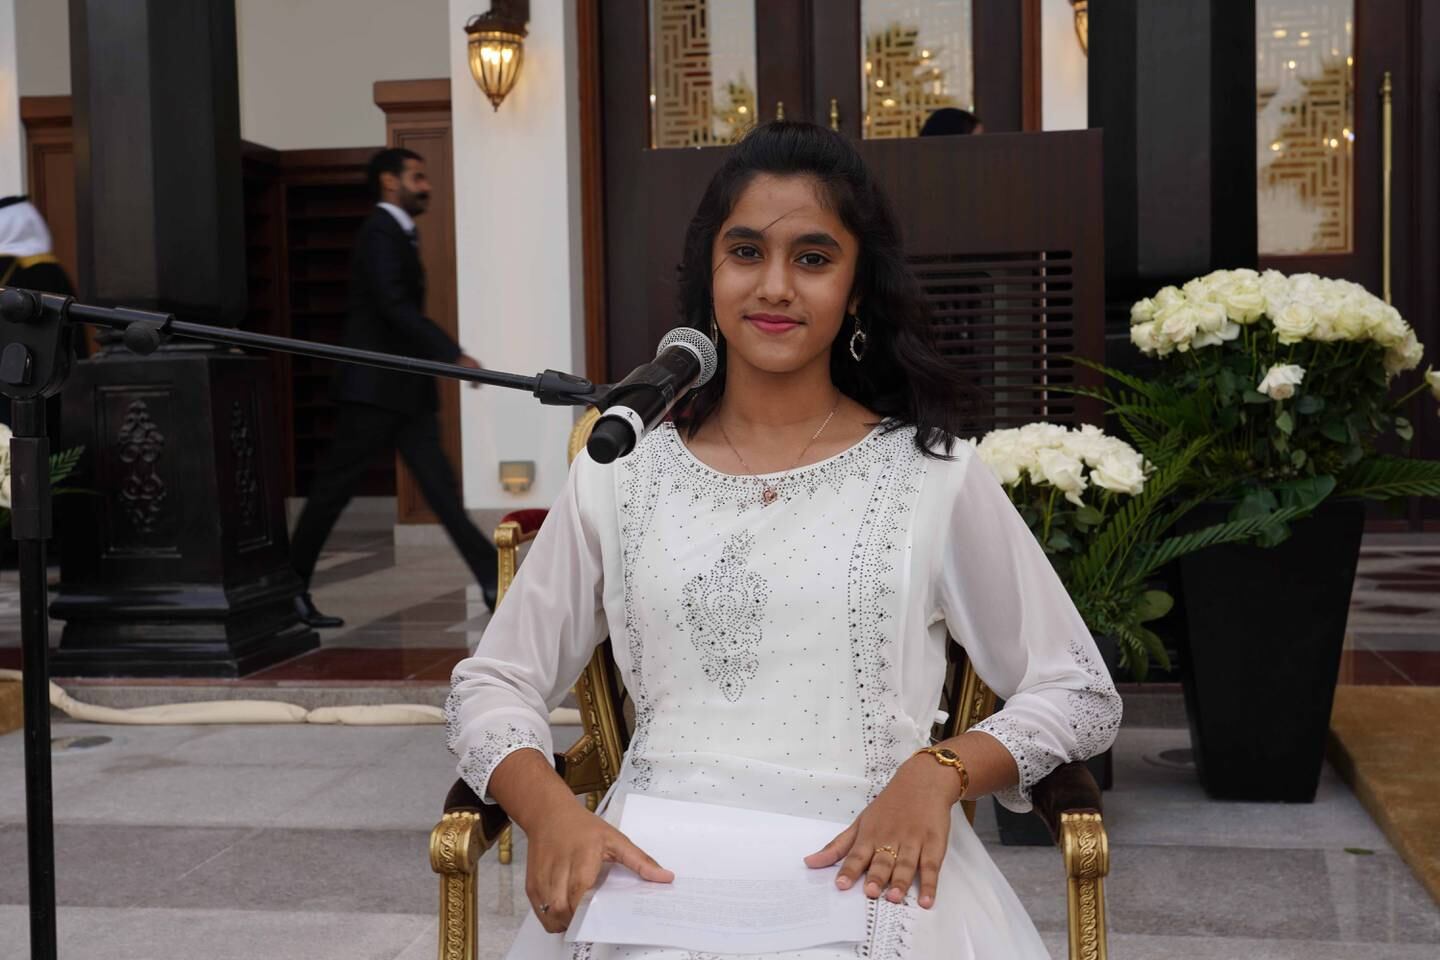 Rashel Dsouza, 12, who read from the Bible. Amy McConaghy / The National